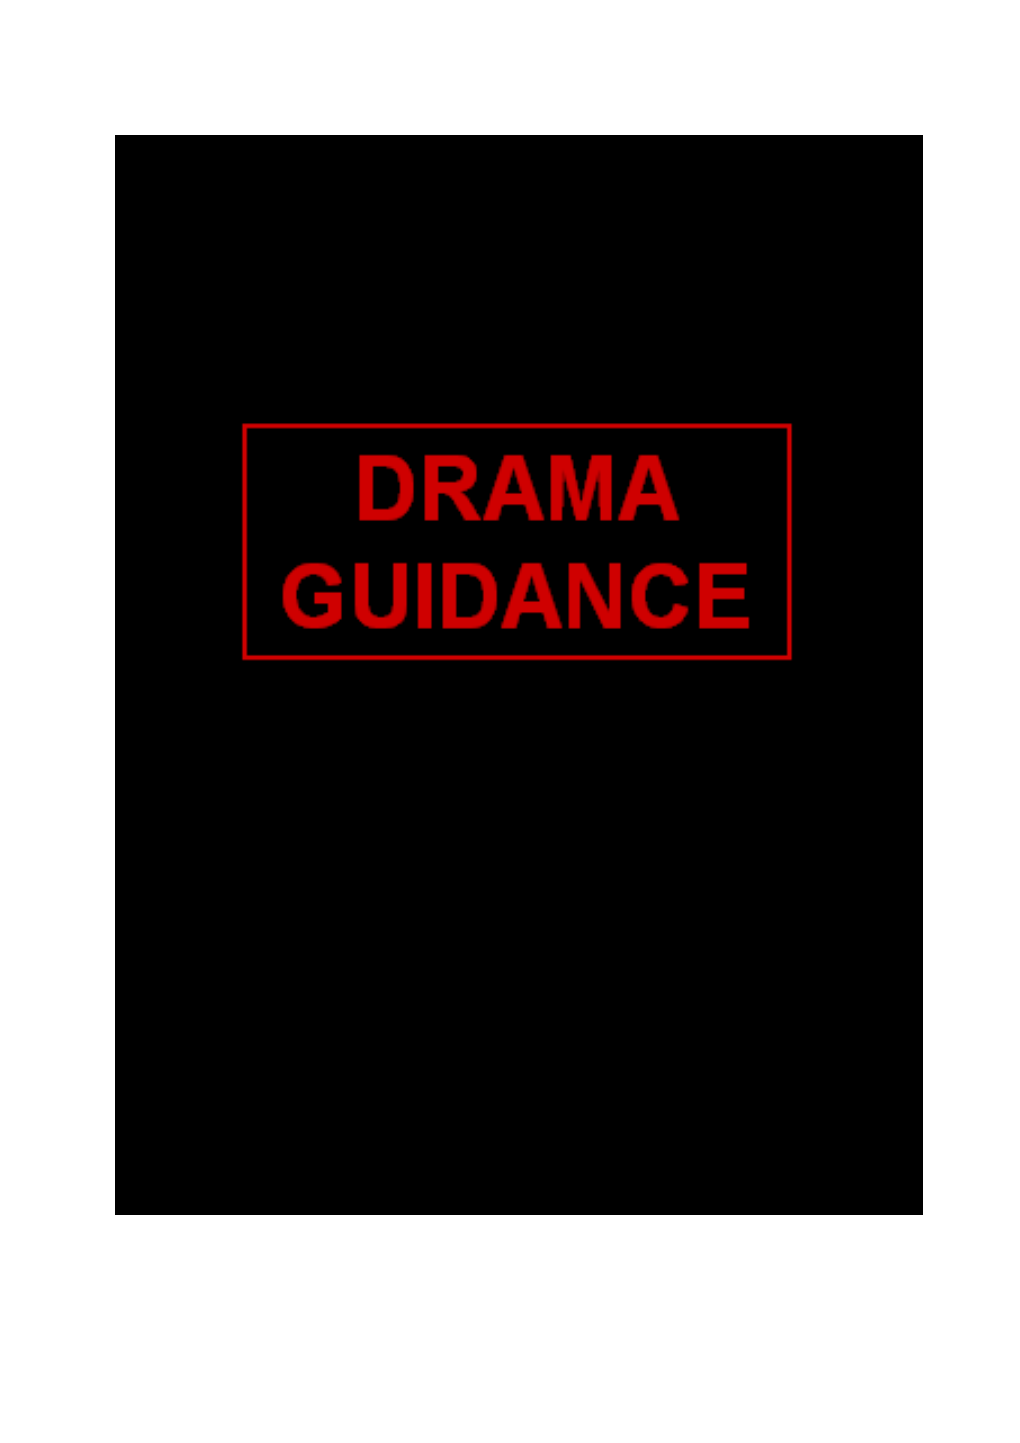 Rationale for Drama